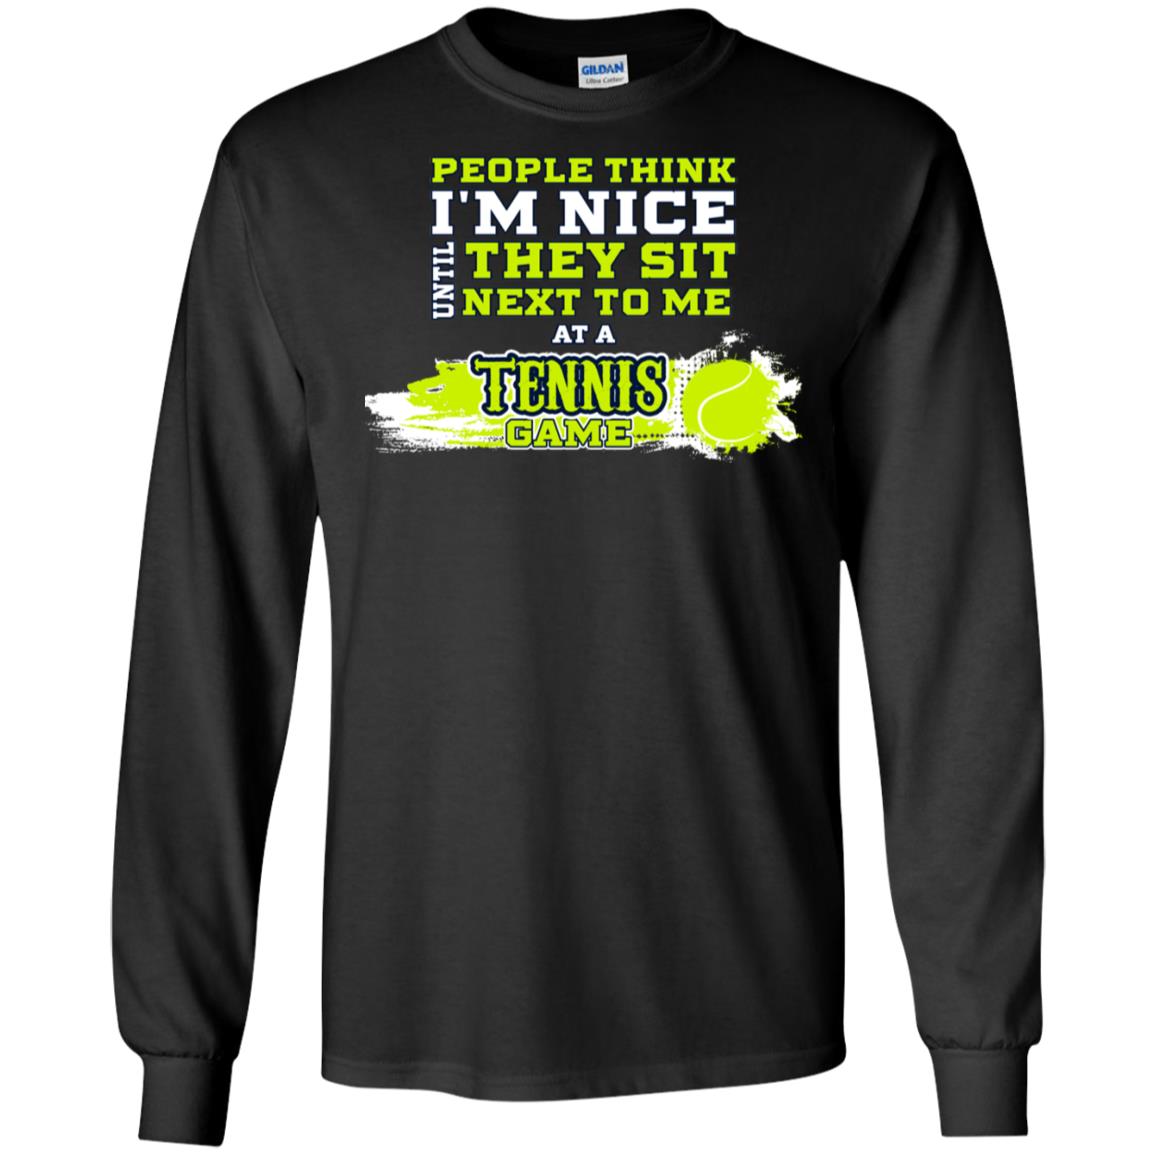 People Think I'm Nice Until They Sit Next To Me At A Tennis Game Shirt For Mens Or WomensG240 Gildan LS Ultra Cotton T-Shirt